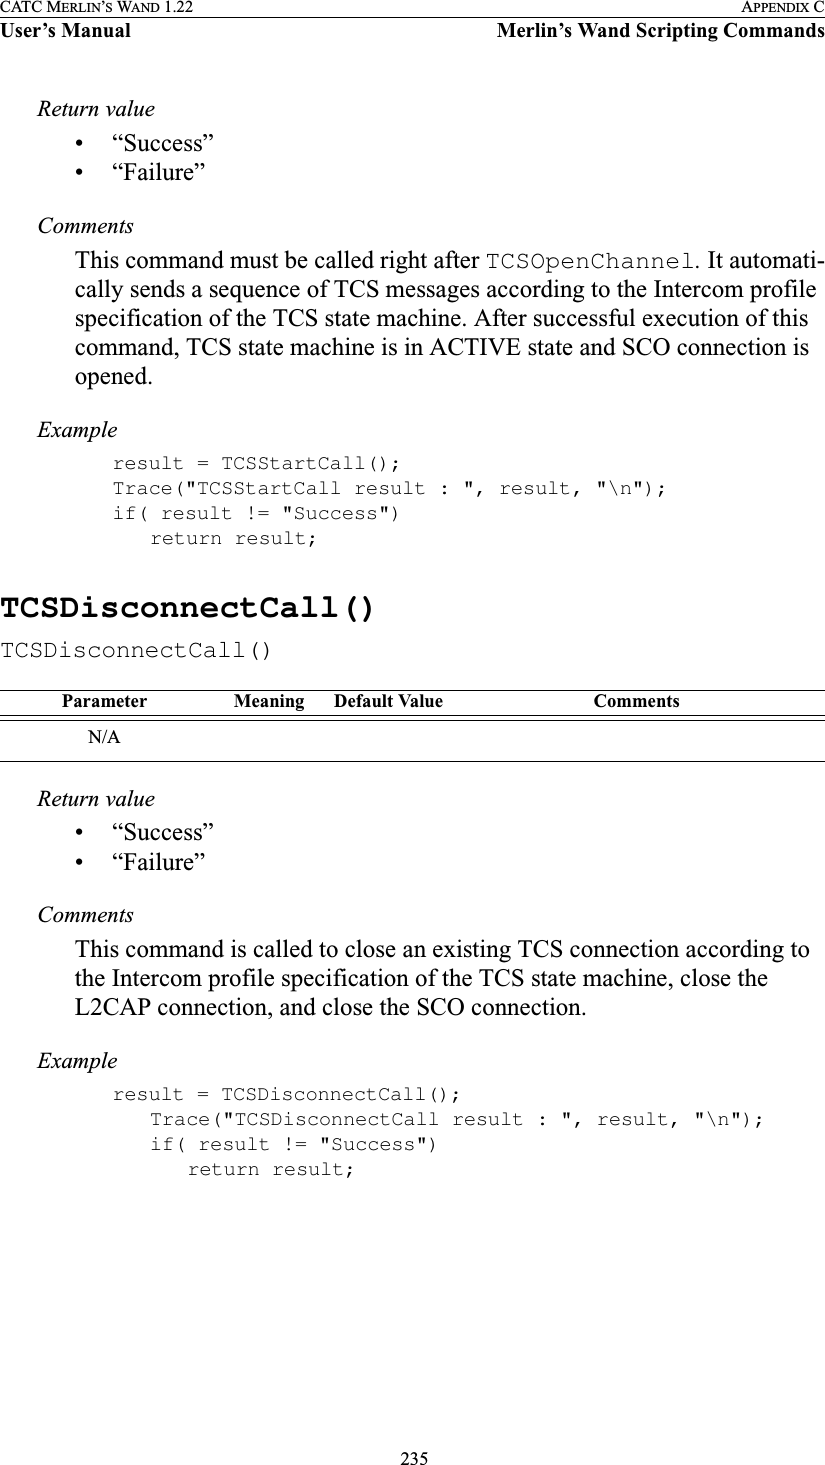  235CATC MERLIN’S WAND 1.22 APPENDIX CUser’s Manual Merlin’s Wand Scripting CommandsReturn value• “Success”• “Failure”CommentsThis command must be called right after TCSOpenChannel. It automati-cally sends a sequence of TCS messages according to the Intercom profile specification of the TCS state machine. After successful execution of this command, TCS state machine is in ACTIVE state and SCO connection is opened.Exampleresult = TCSStartCall();Trace(&quot;TCSStartCall result : &quot;, result, &quot;\n&quot;);if( result != &quot;Success&quot;)return result;TCSDisconnectCall()TCSDisconnectCall()Return value• “Success”• “Failure”CommentsThis command is called to close an existing TCS connection according to the Intercom profile specification of the TCS state machine, close the L2CAP connection, and close the SCO connection. Exampleresult = TCSDisconnectCall();Trace(&quot;TCSDisconnectCall result : &quot;, result, &quot;\n&quot;);if( result != &quot;Success&quot;)return result;Parameter Meaning Default Value CommentsN/A